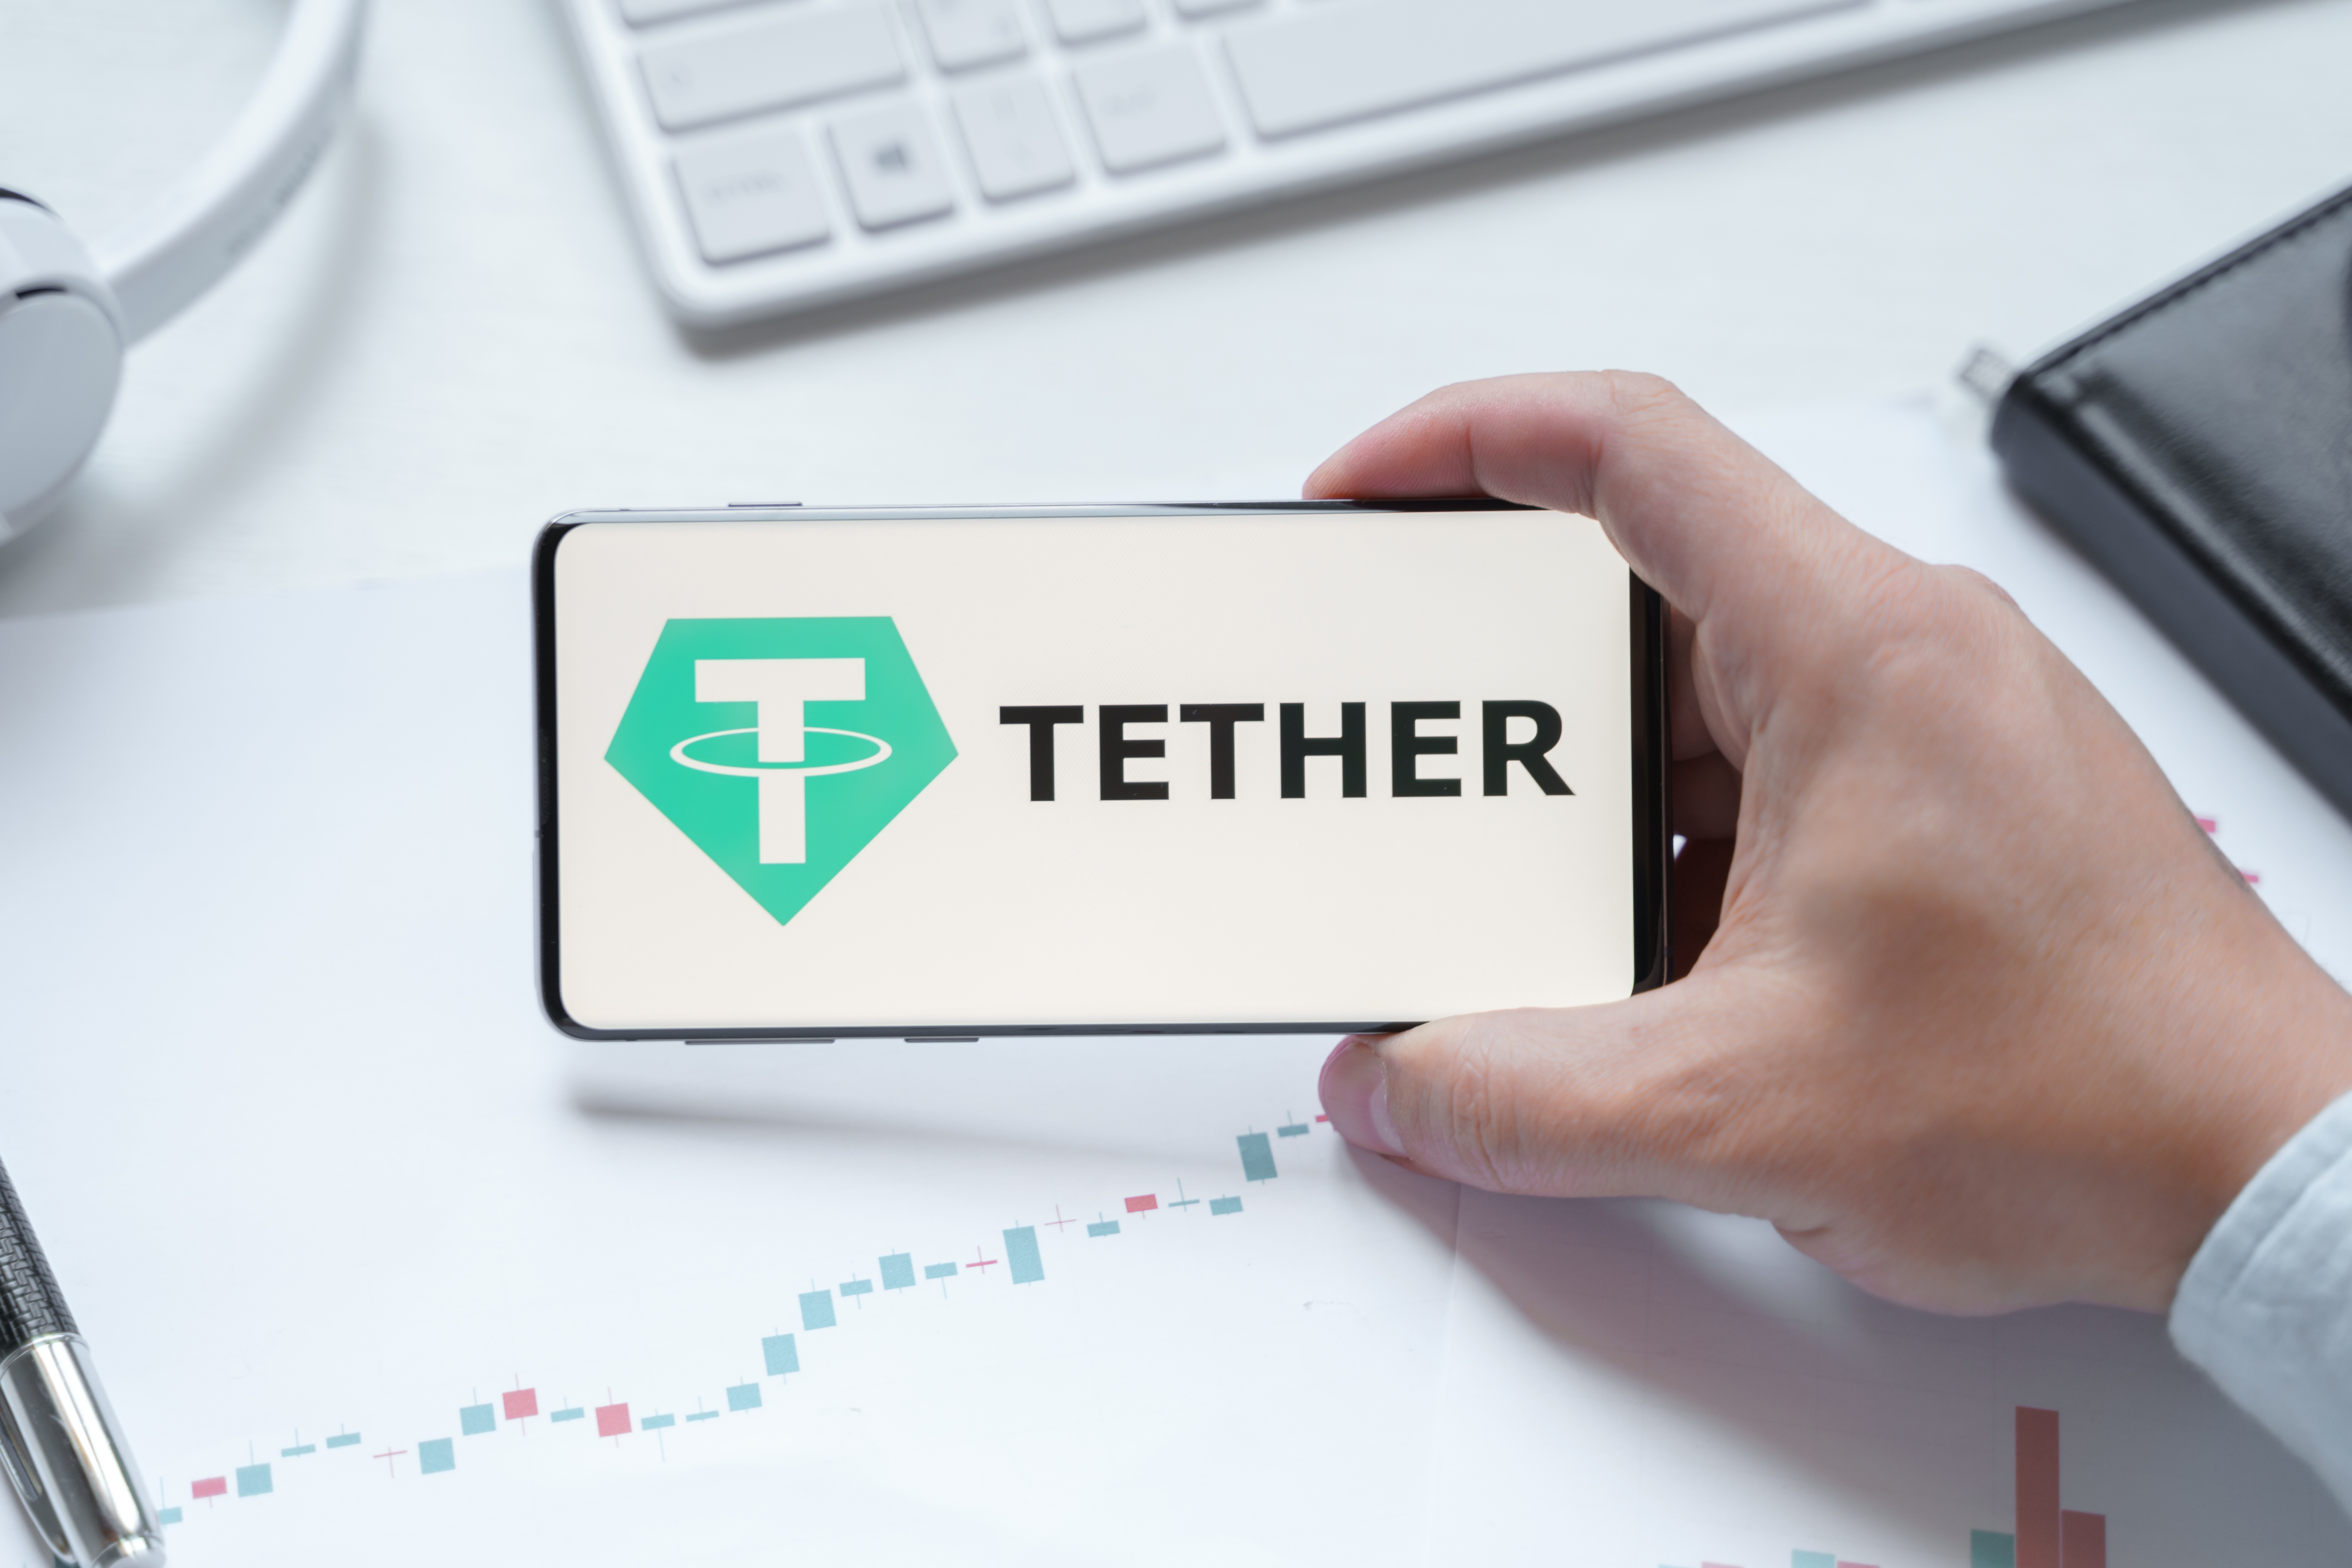 Russia Moscow 08.06.2021 Man holding logo of Tether USDT token in mobile phone. Cryptocurrency stablecoin. Cryptocurrency token USDT. Trading blockchain decentralized exchange DEX. Digital money